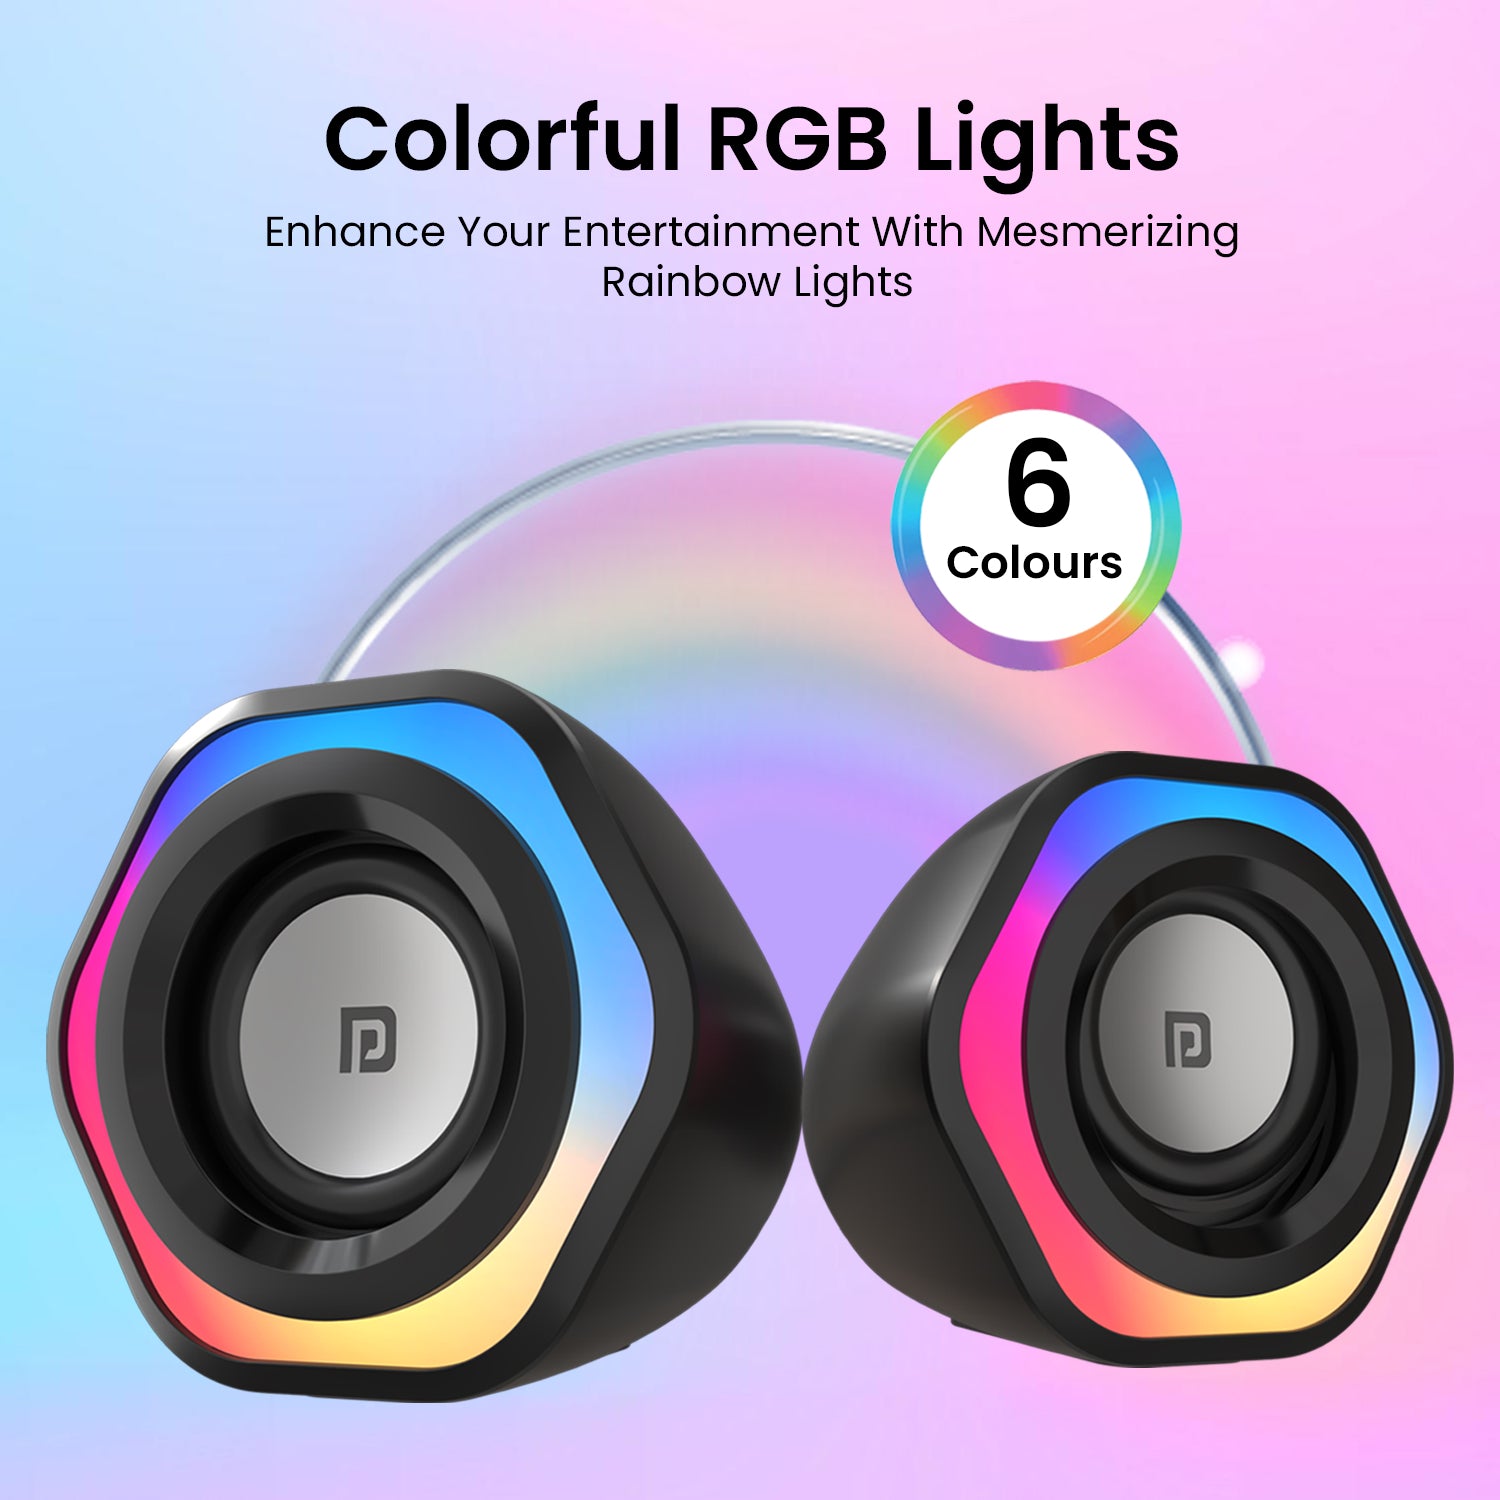 Black Portronics In Tune 4 6 watts portable usb speaker comes with colorful rgb lights